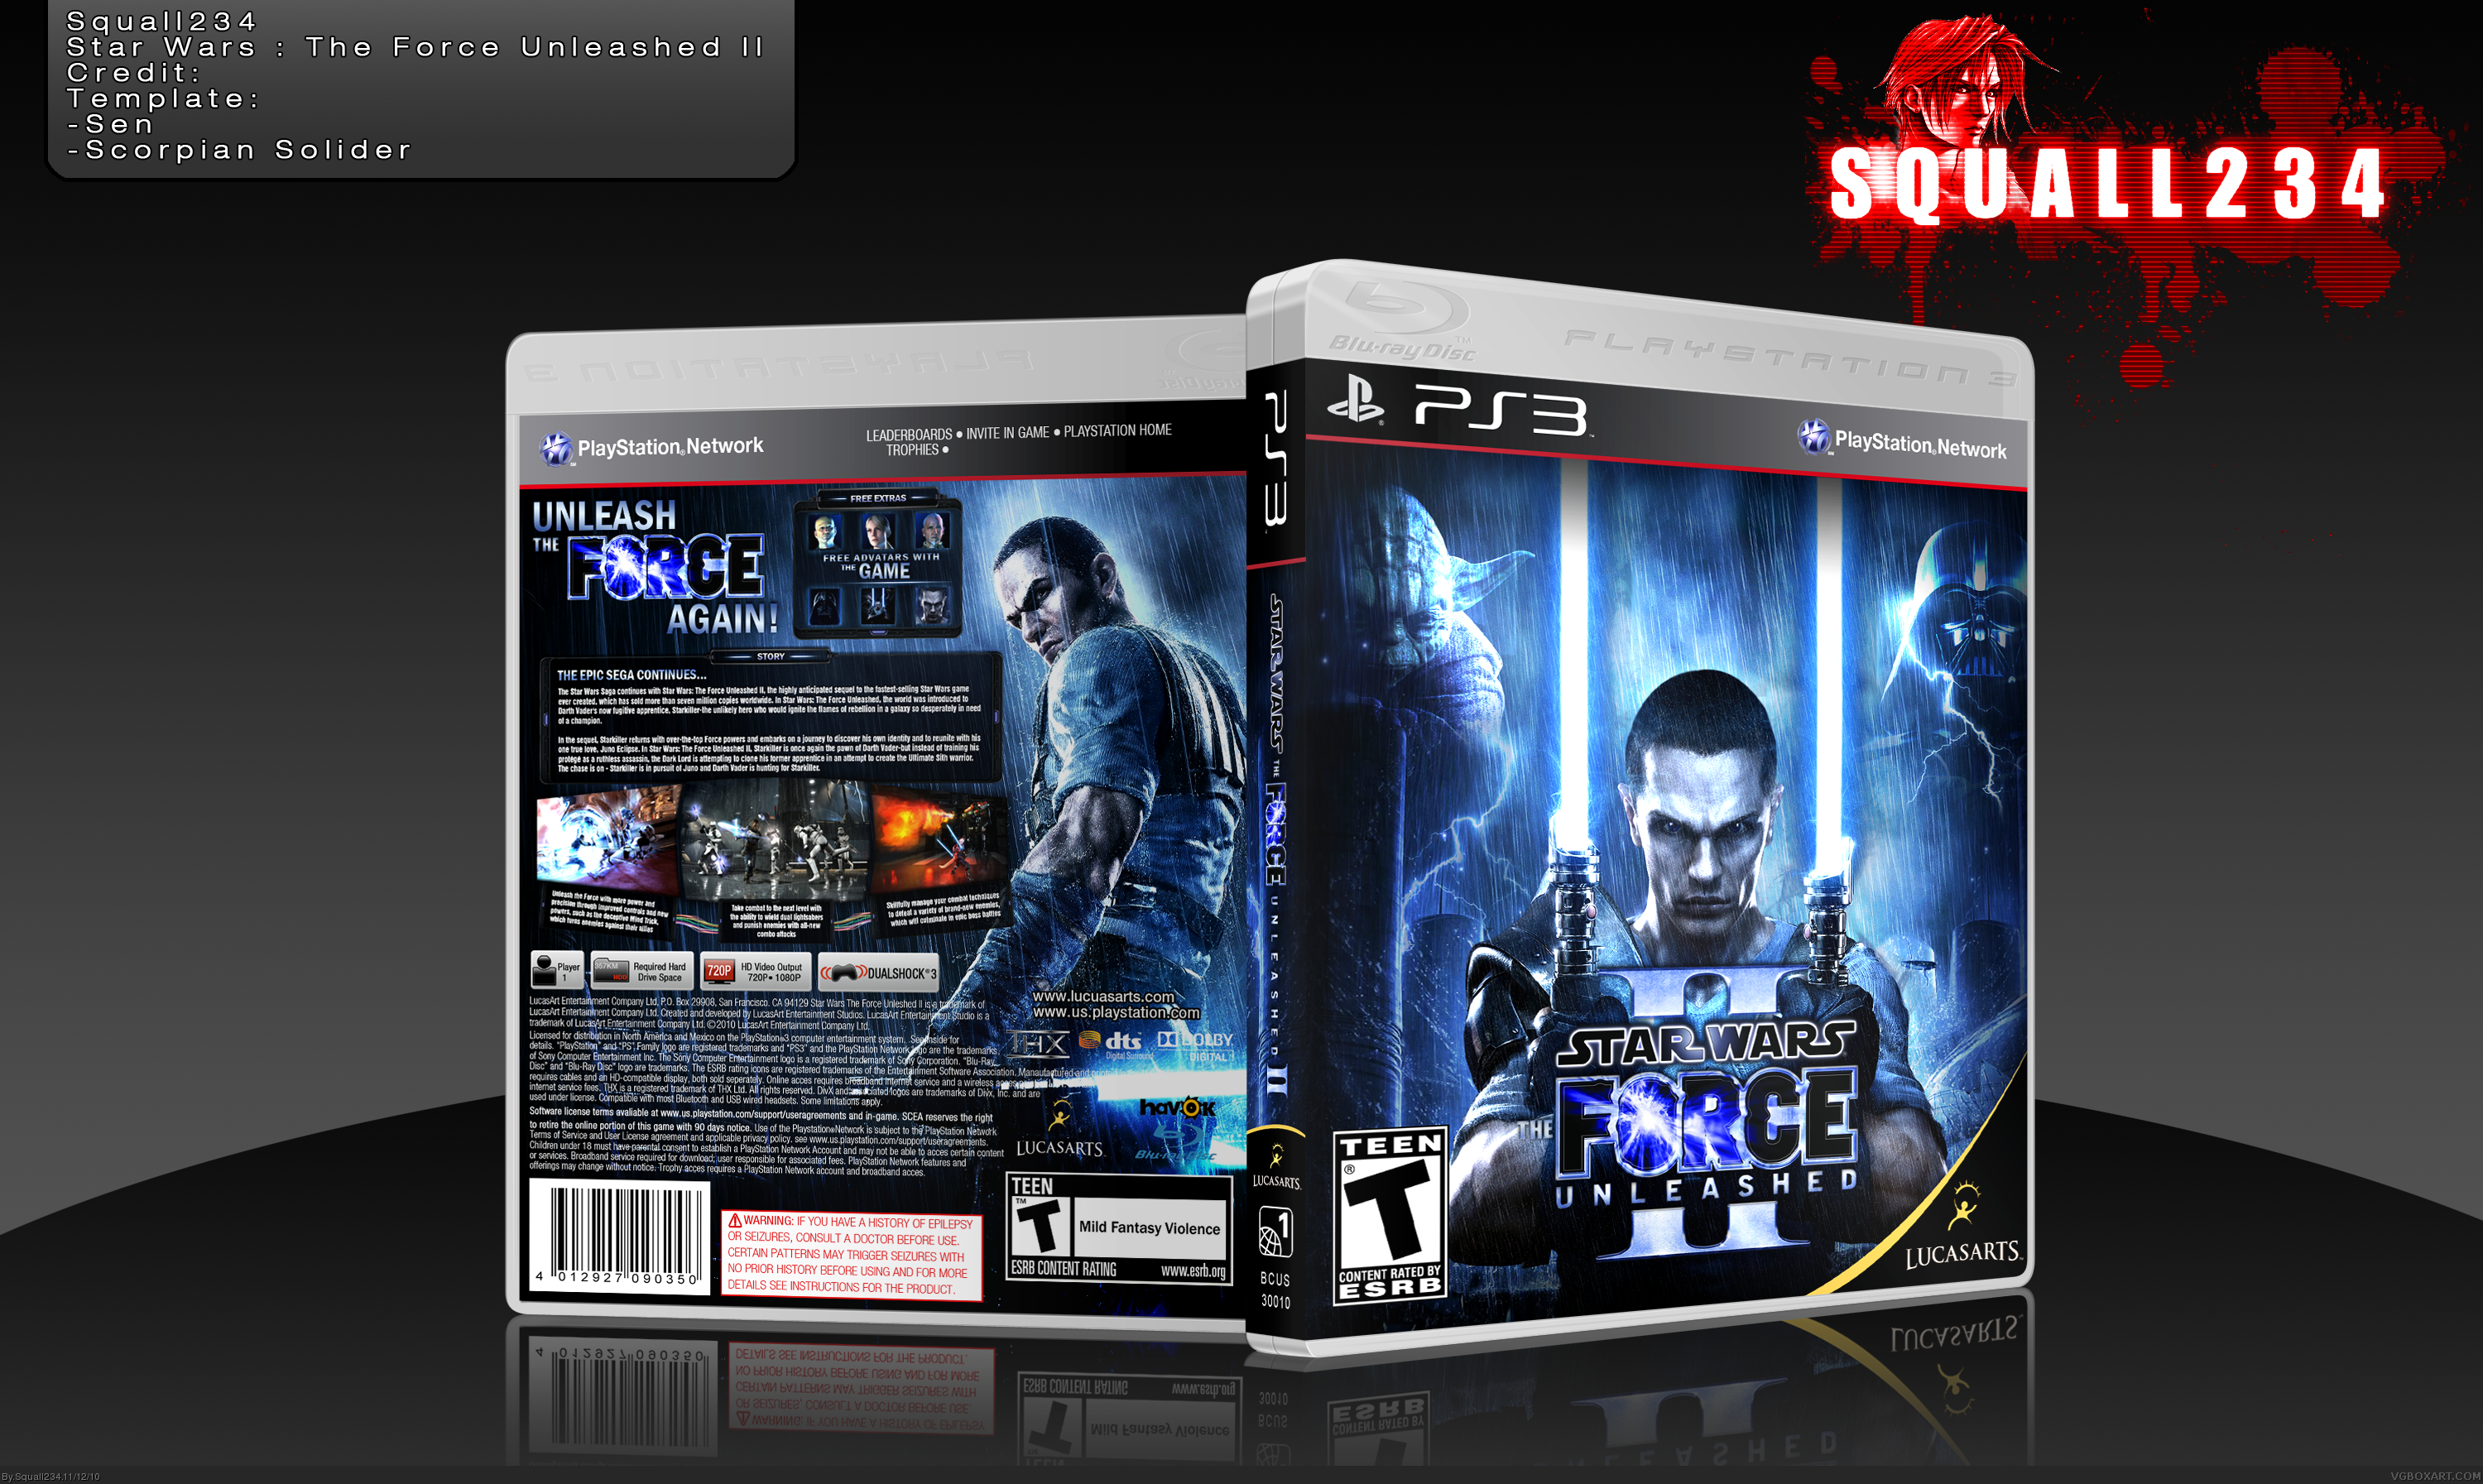 Star Wars: The Force Unleashed II box cover